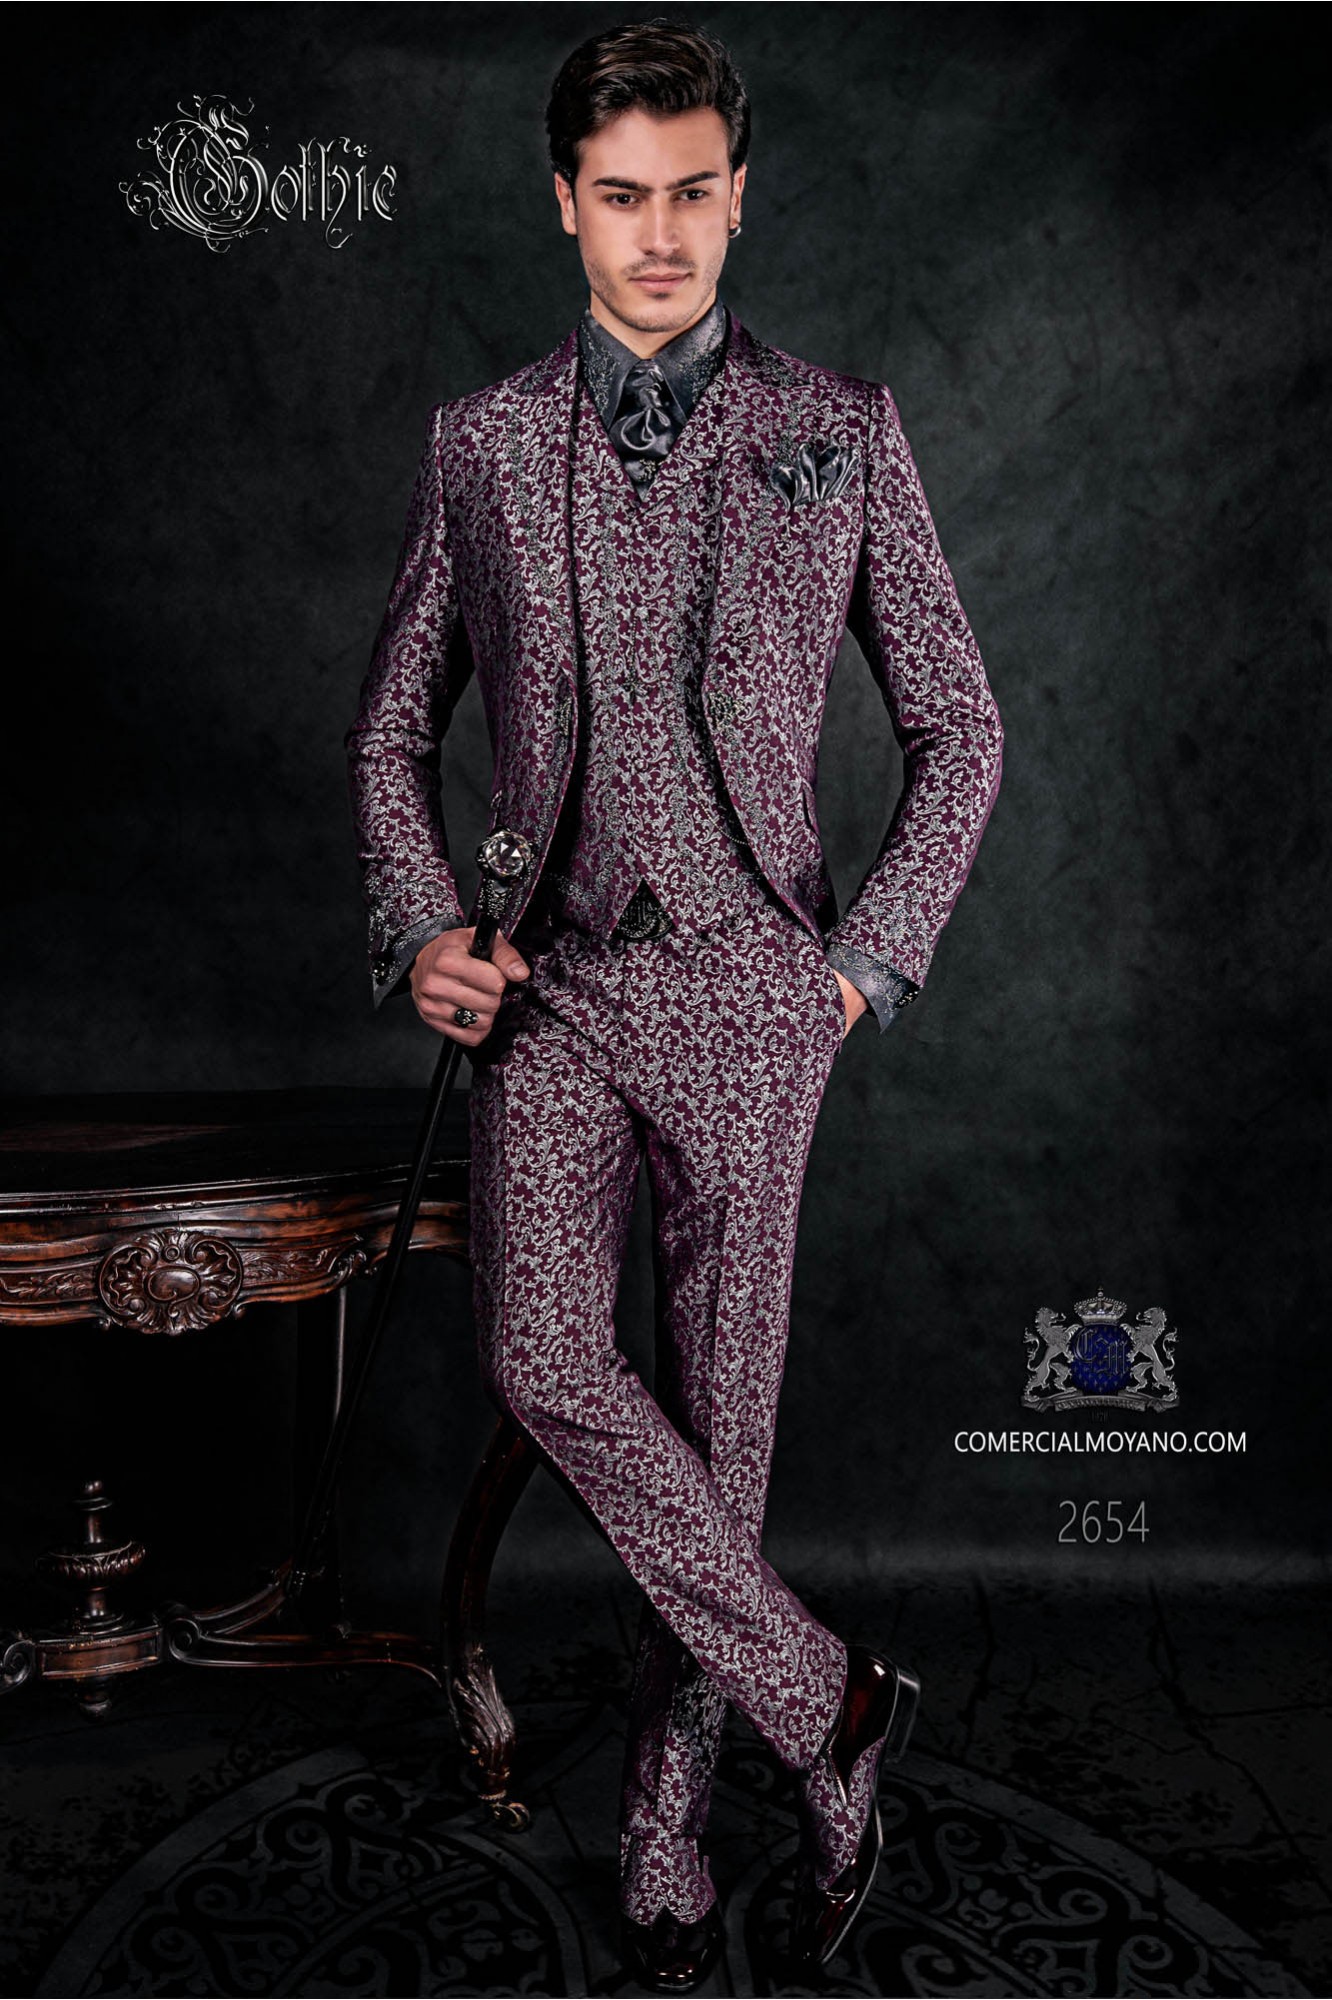 Baroque groom suit, vintage frock coat in silver and purple jacquard fabric with silver embroidery model 2654 Mario Moyano